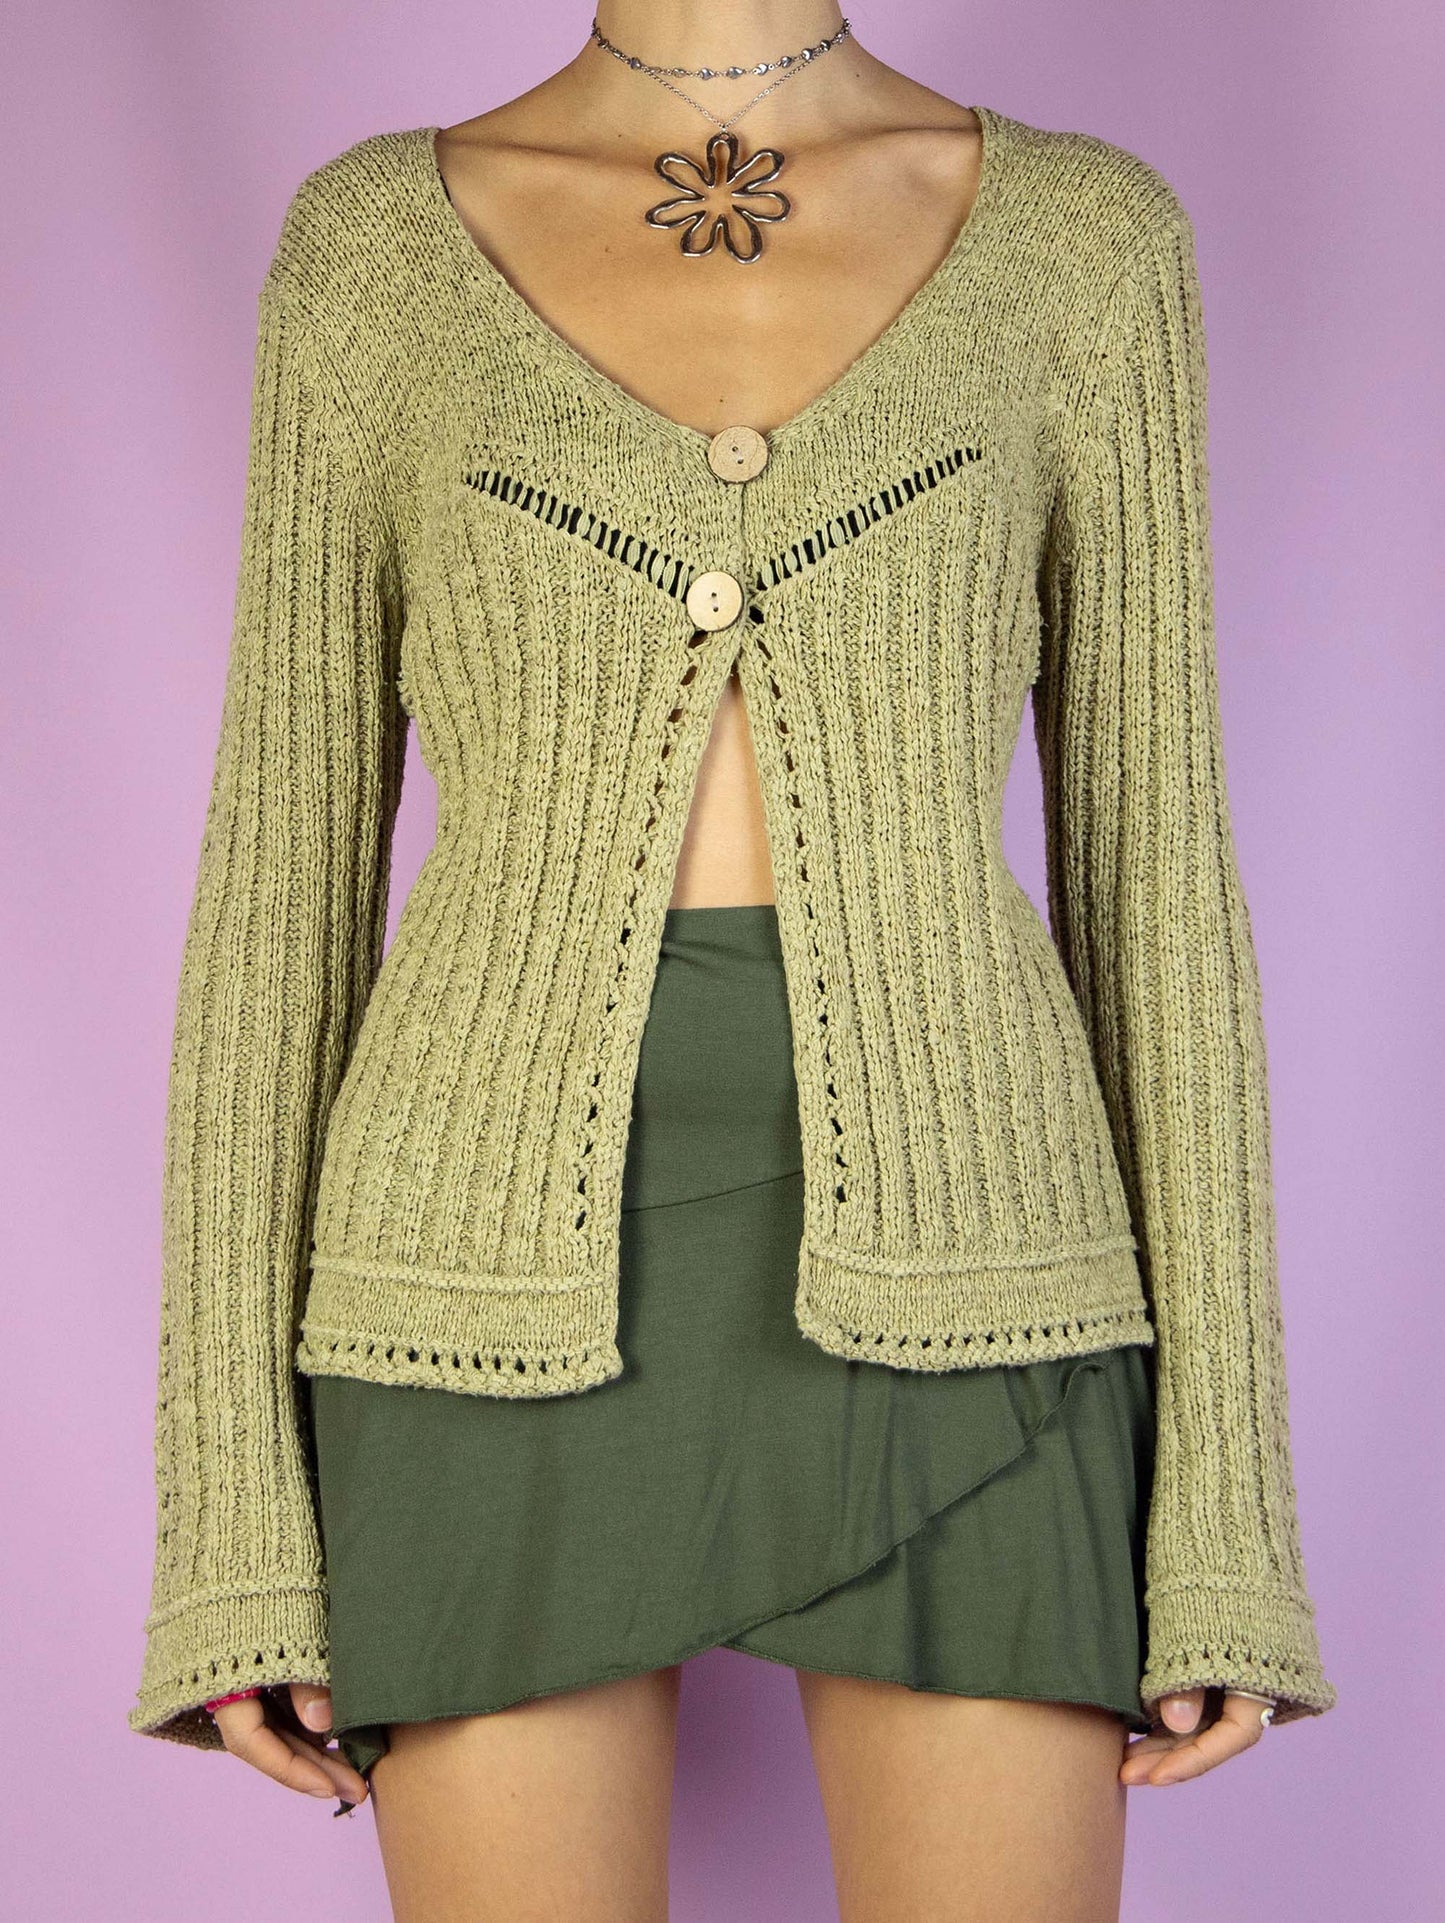 The Y2K Green Two-Button Cardigan is a vintage ribbed cardigan in green-beige with bell sleeves and a two-button closure, featuring a v-neck. Super cute boho fairy grunge 2000s knit sweater.